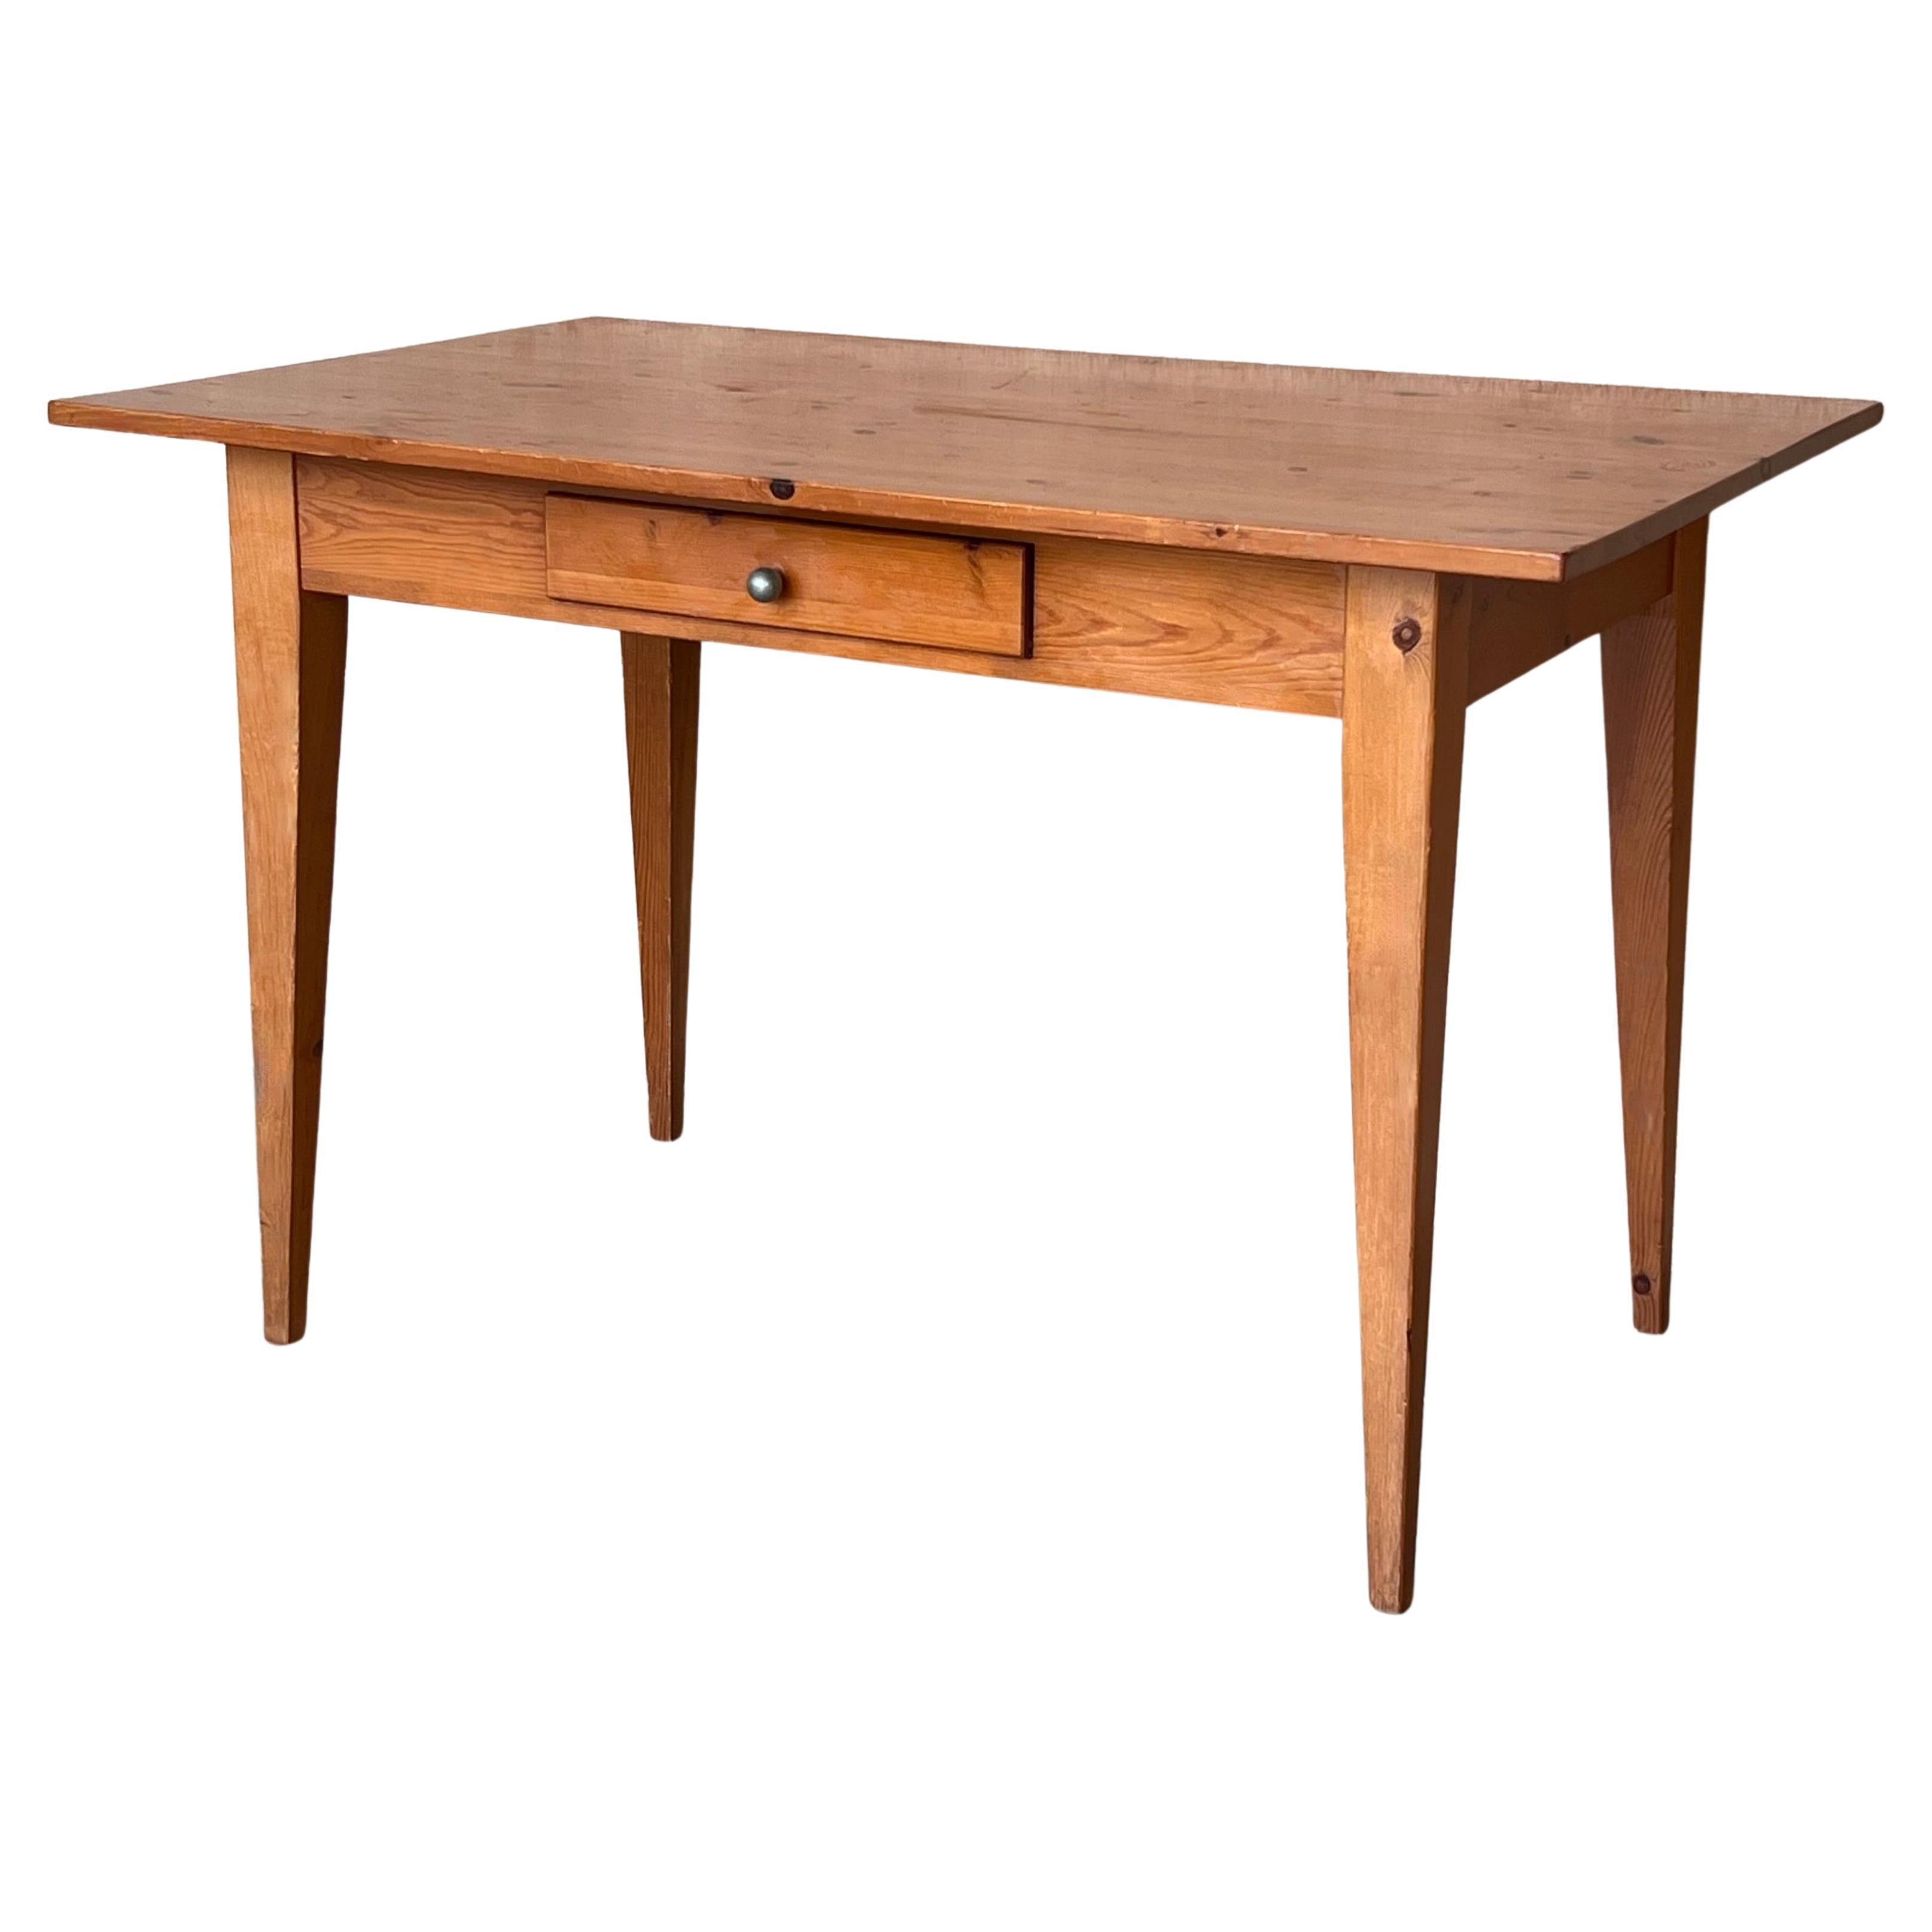 Early 20th Spanish Mobila Country Farm Desk Table or Butcher Block